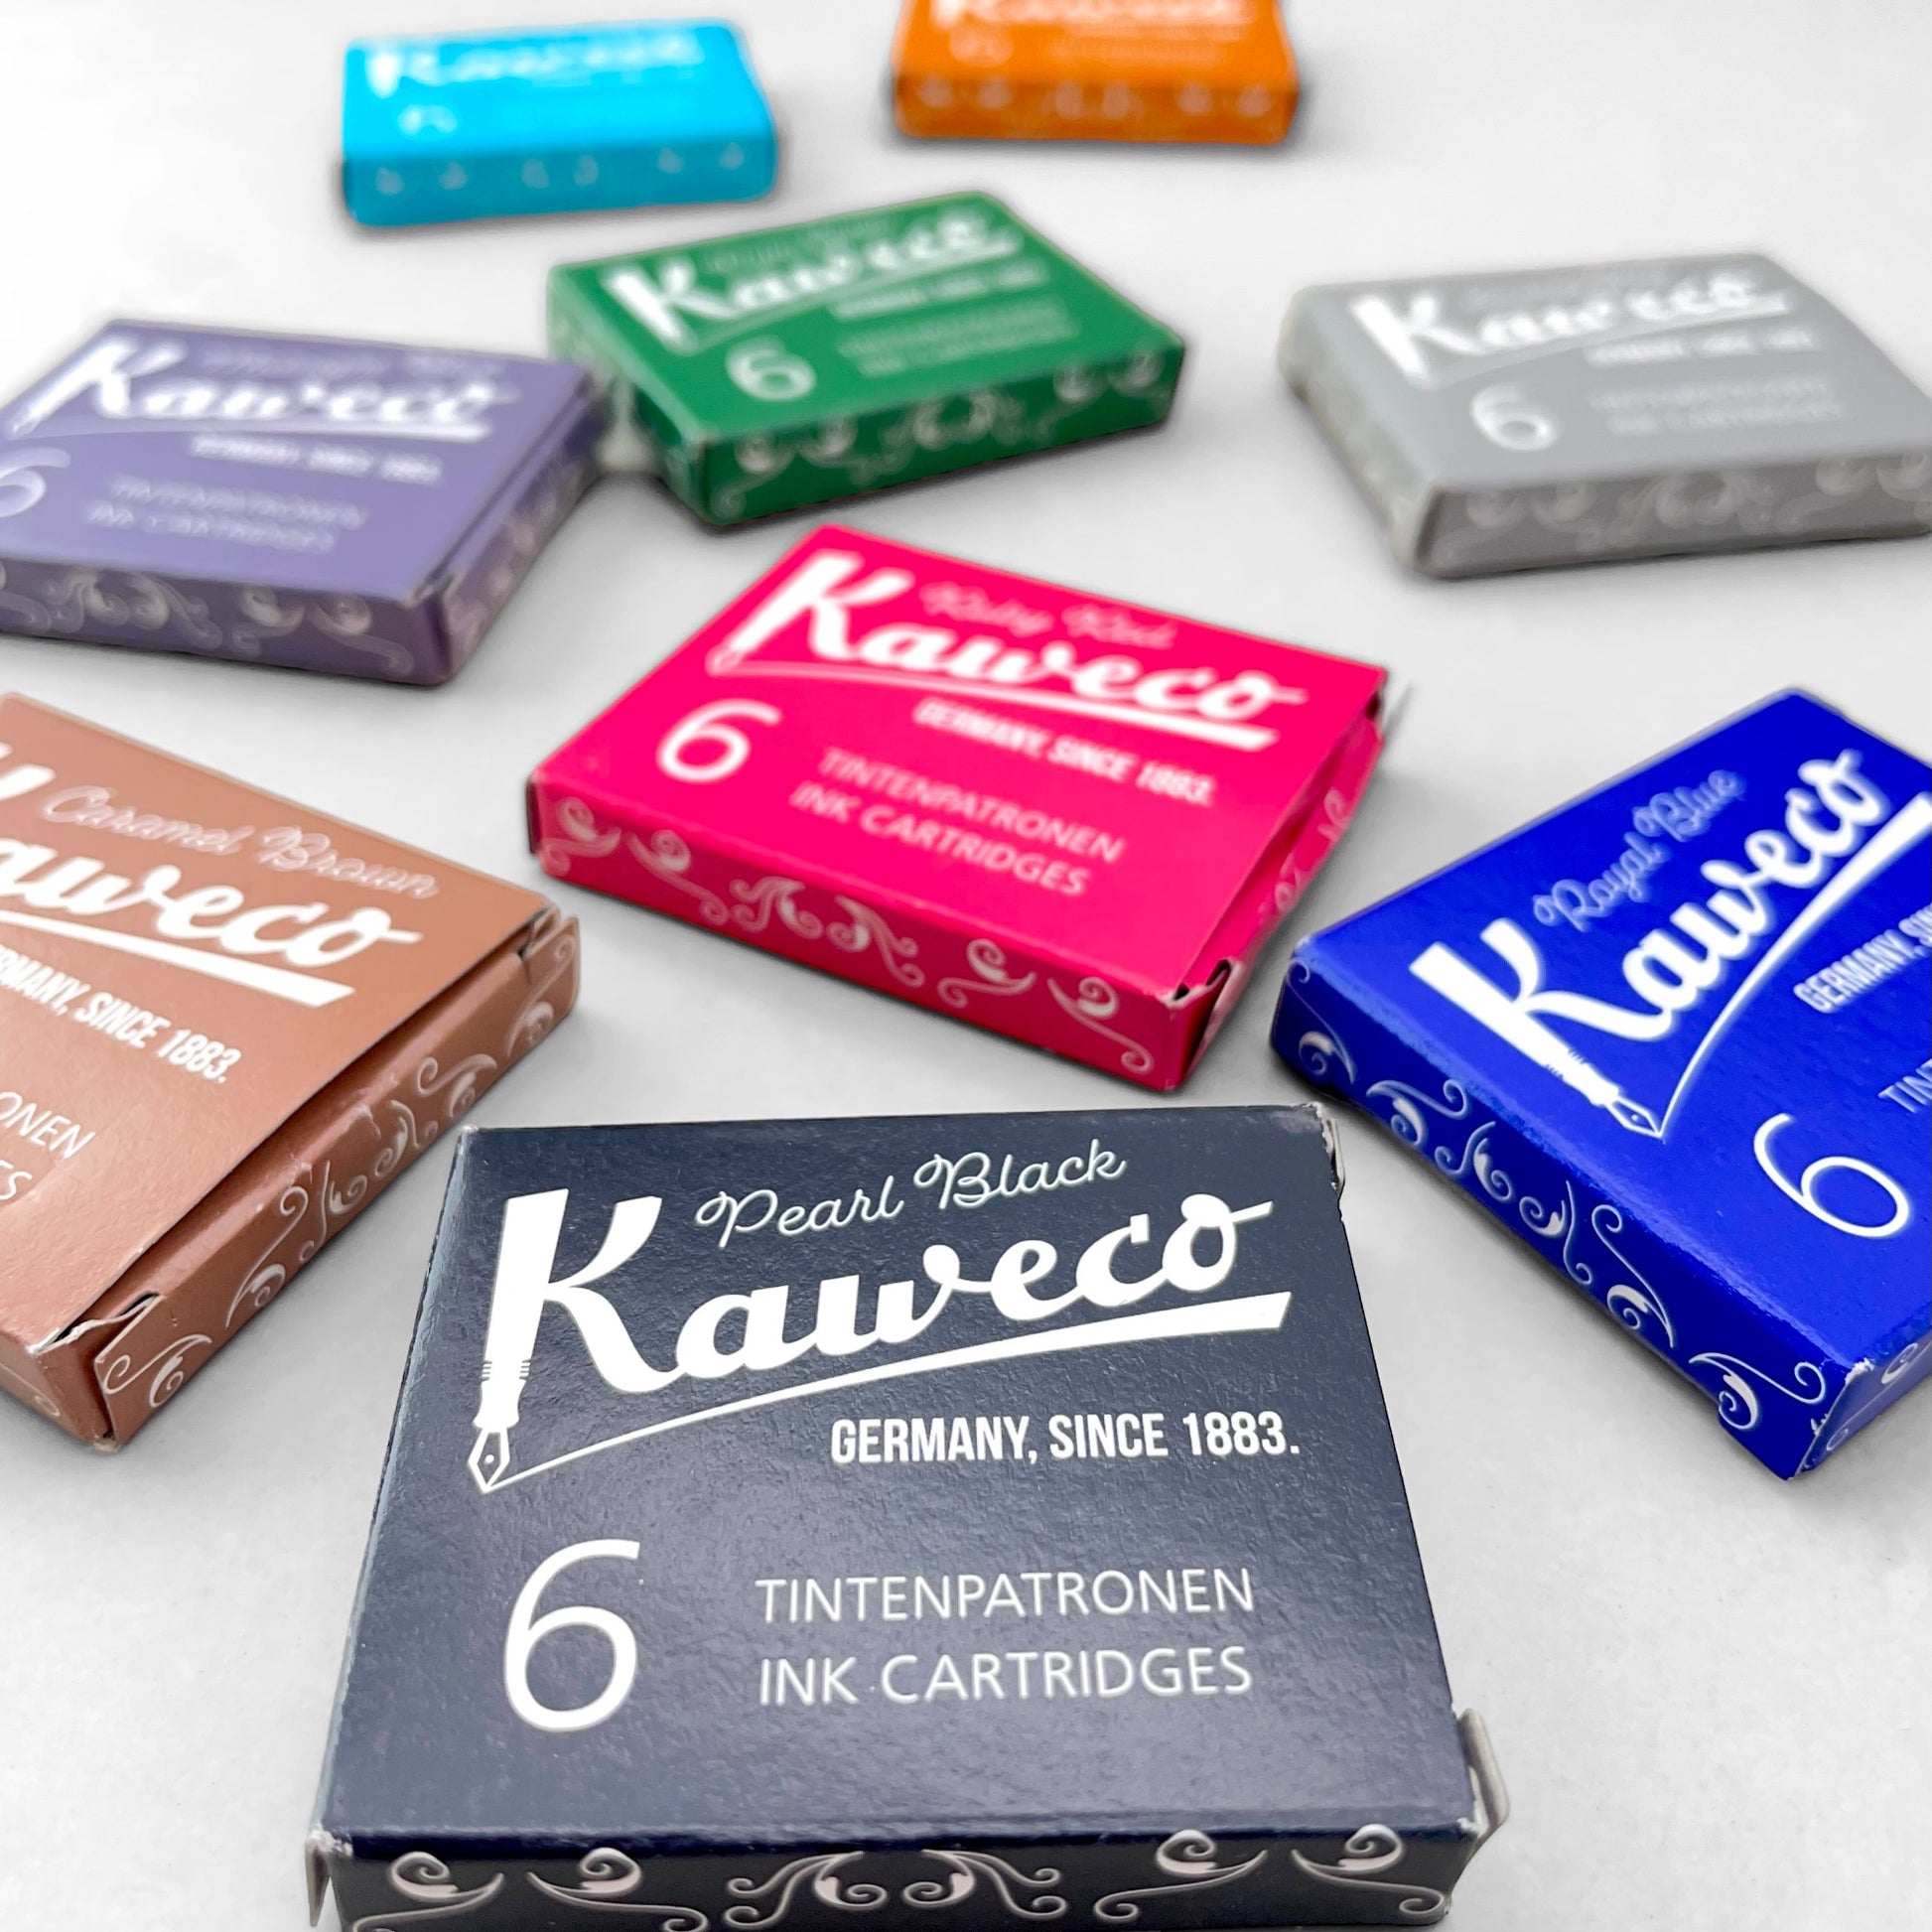 Box of 6 ink cartridges by Kaweco in pearl black colour